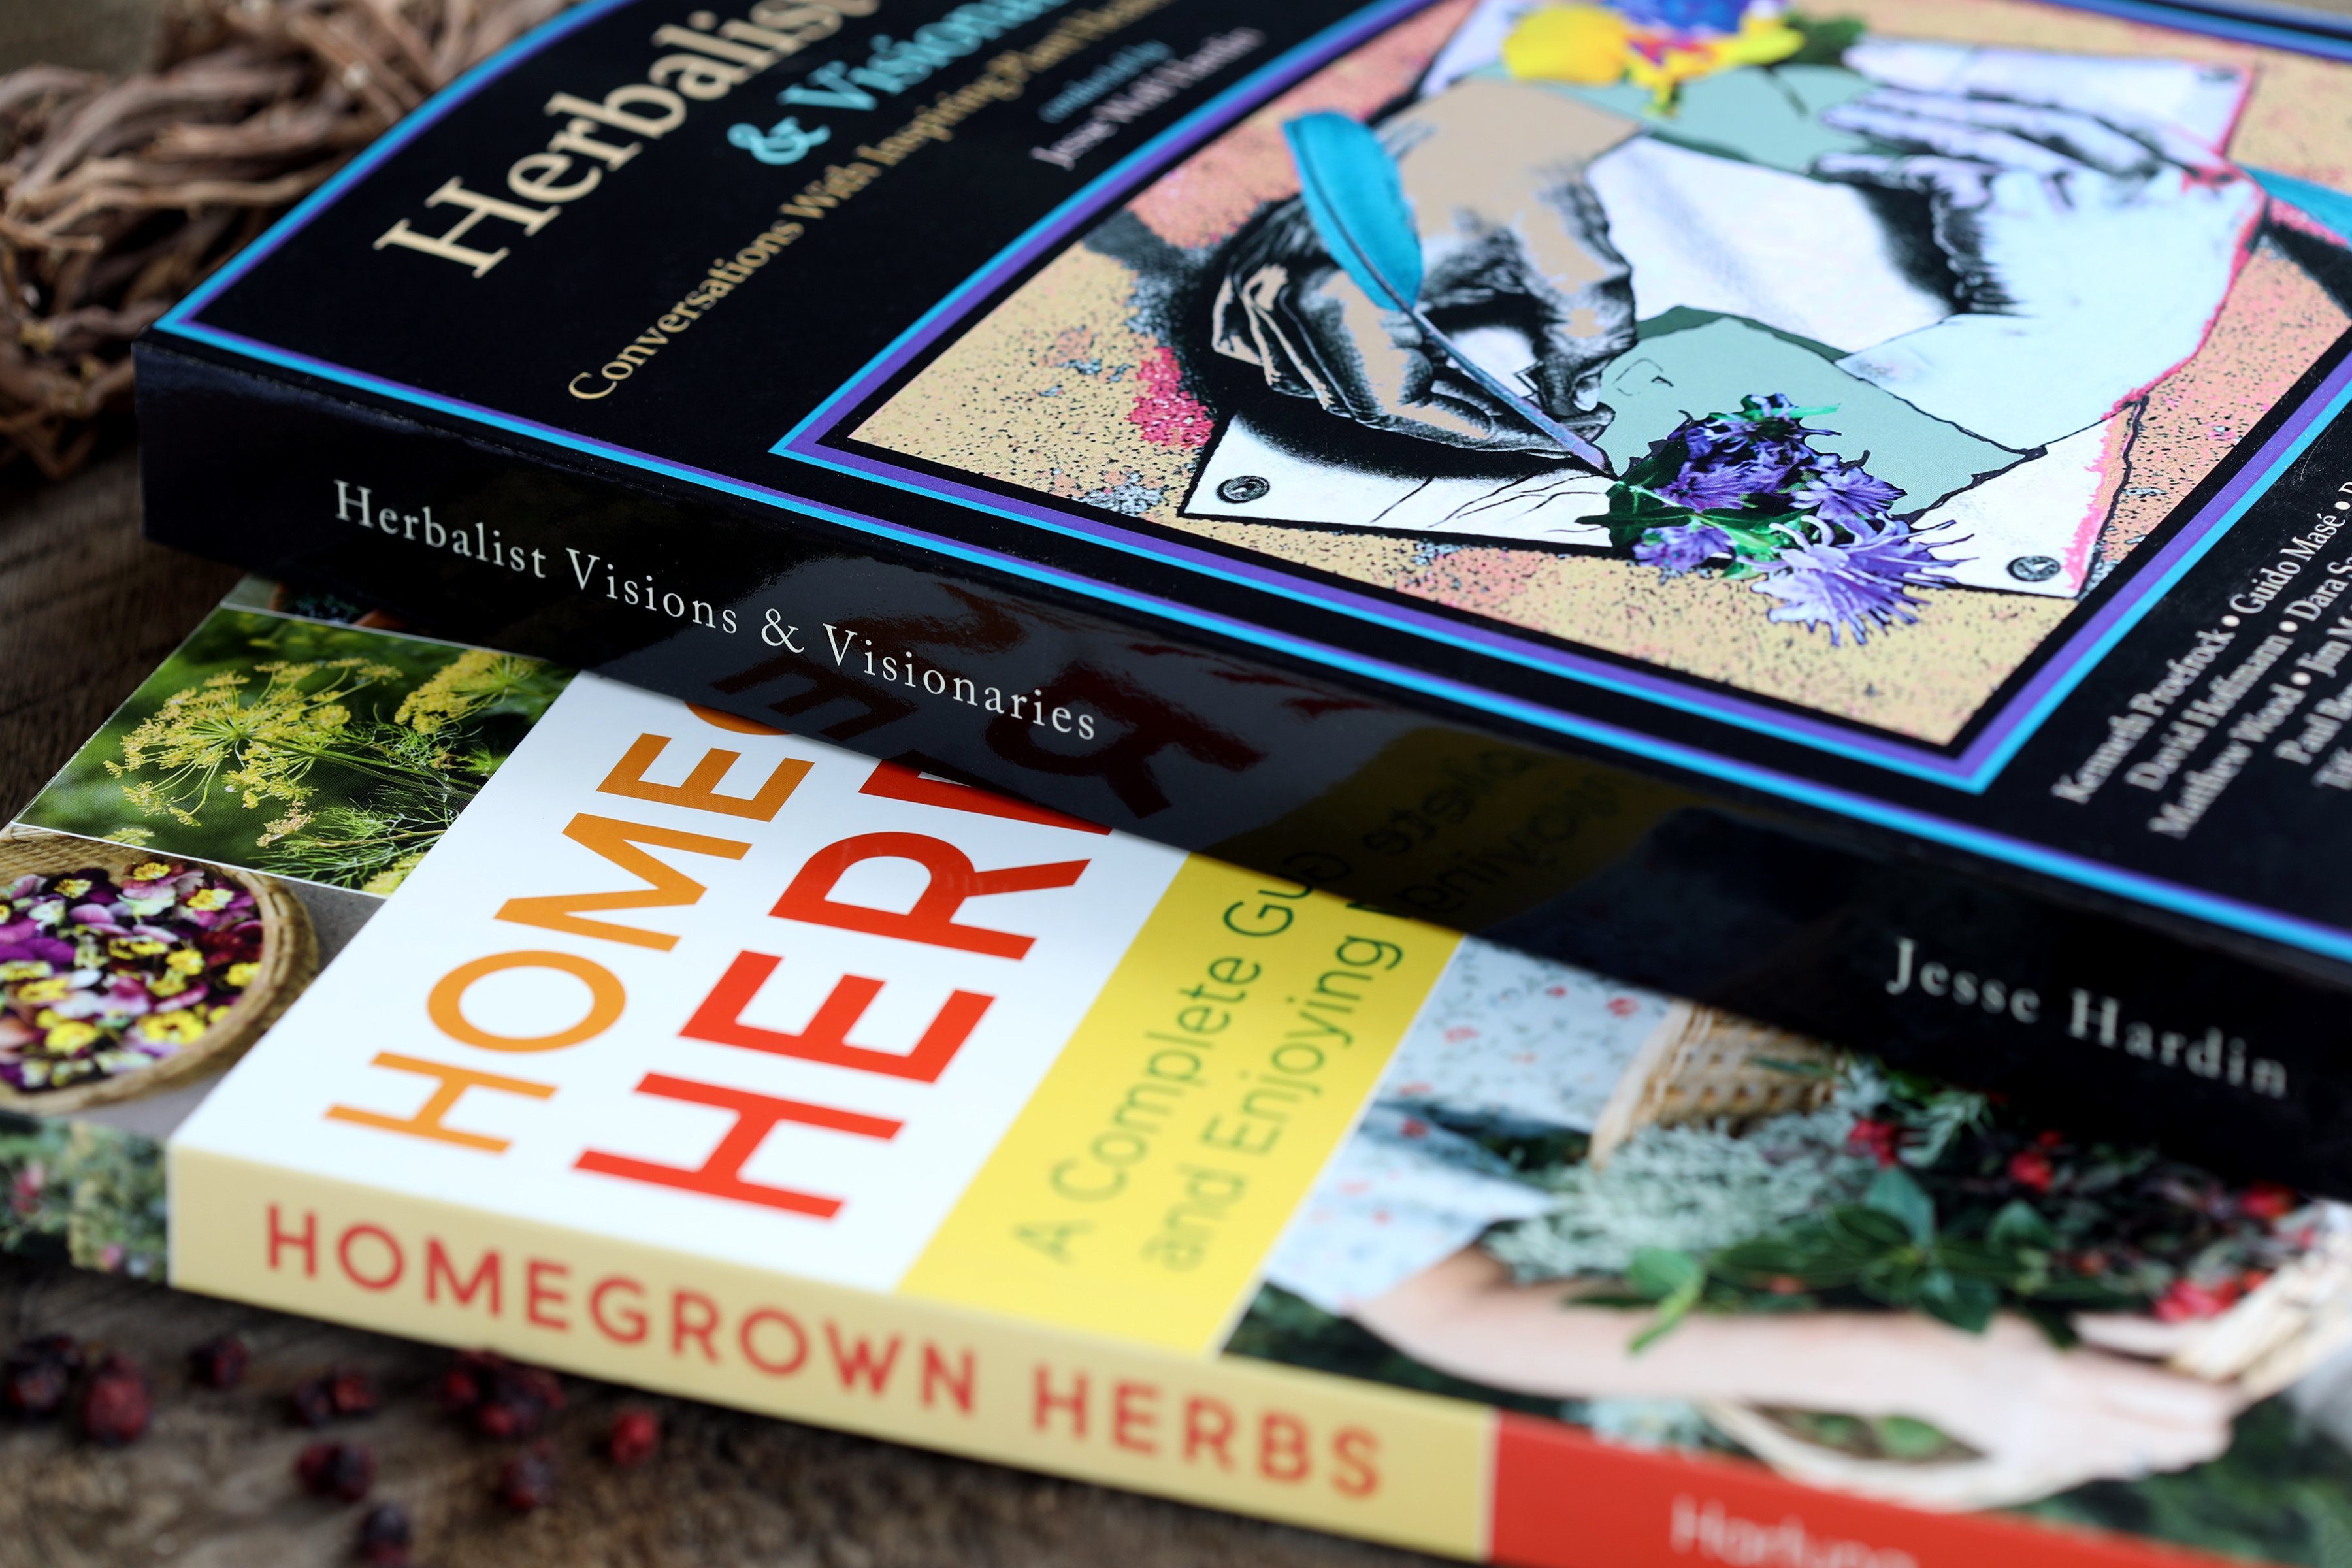 Close up photo of two colorful books on herbs and herbalists